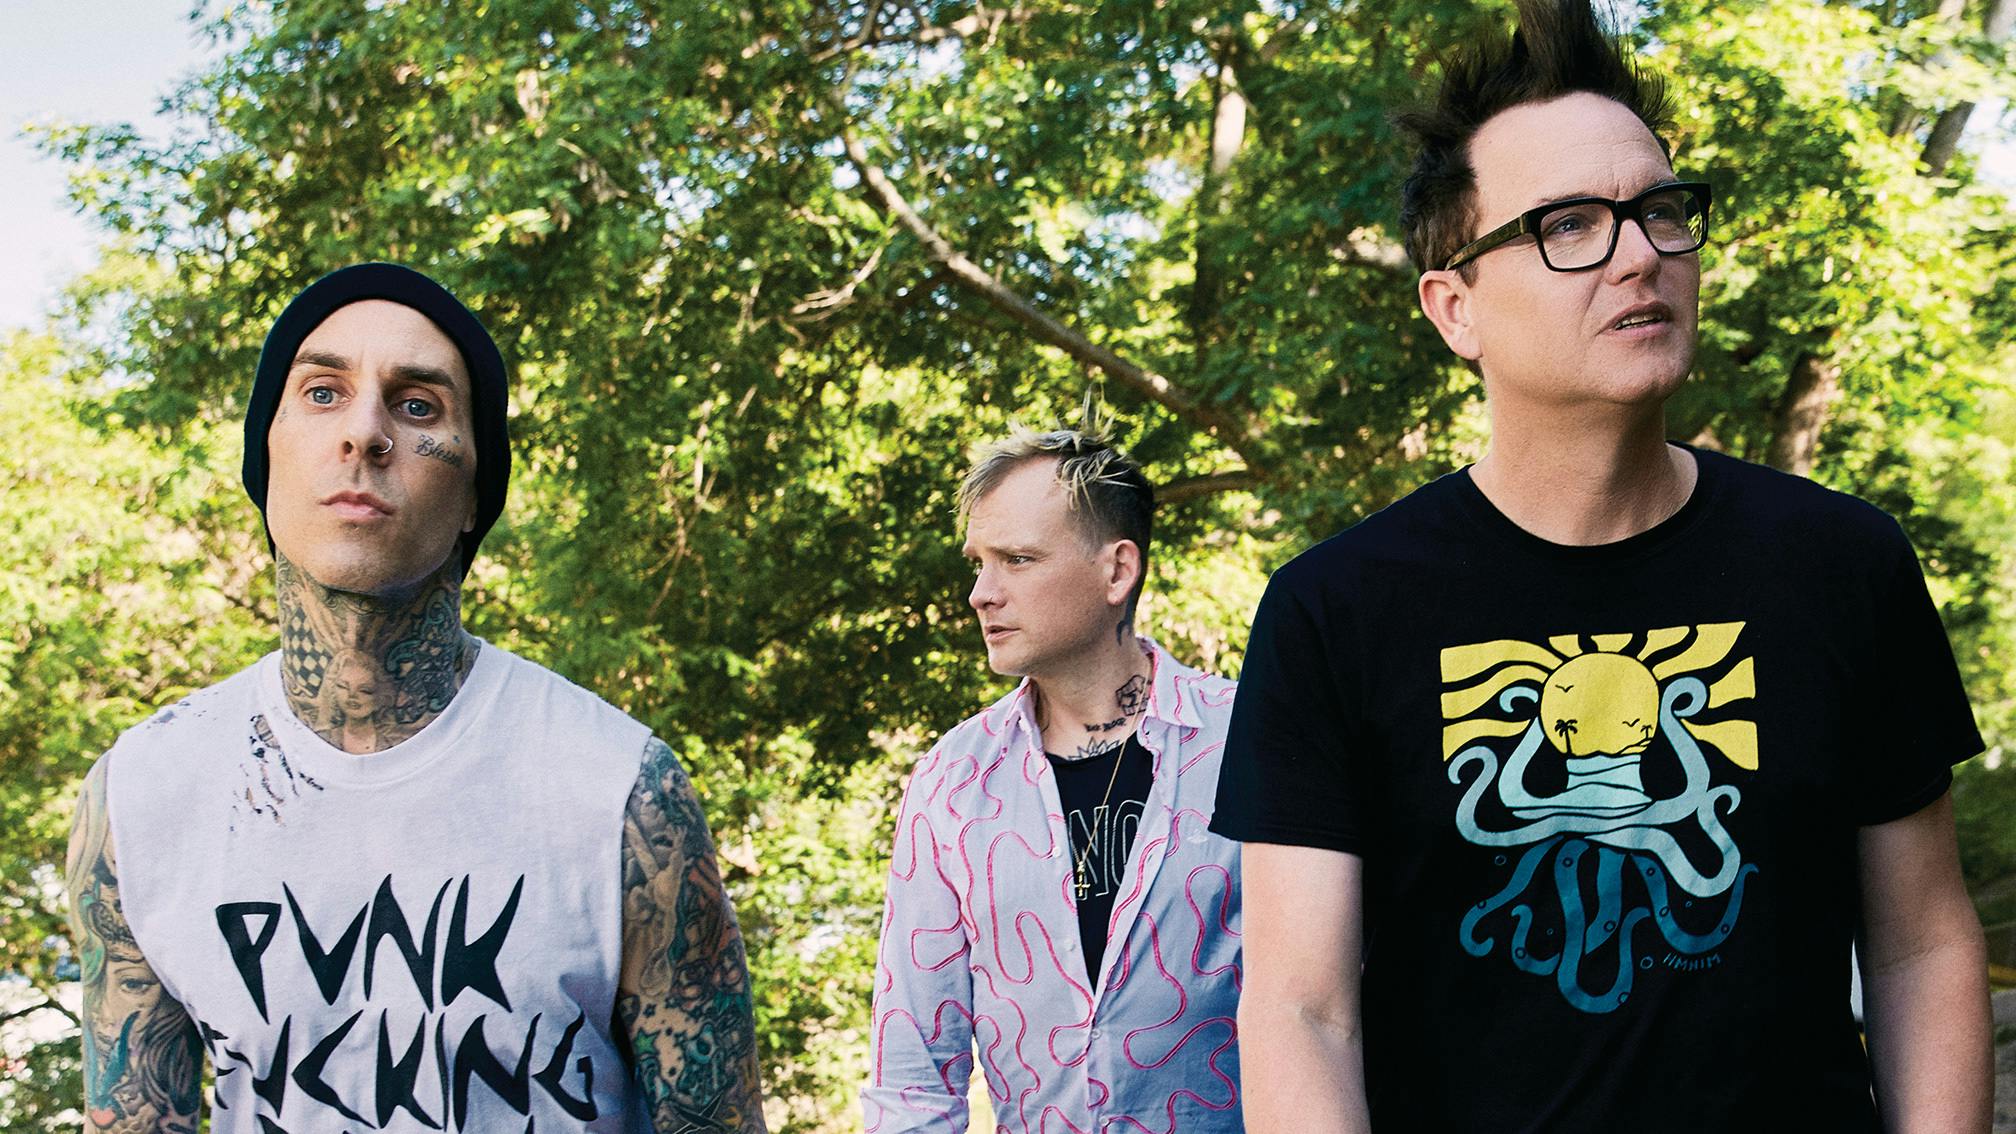 Matt Skiba loves blink-182’s new album and is “grateful” for his time with the band